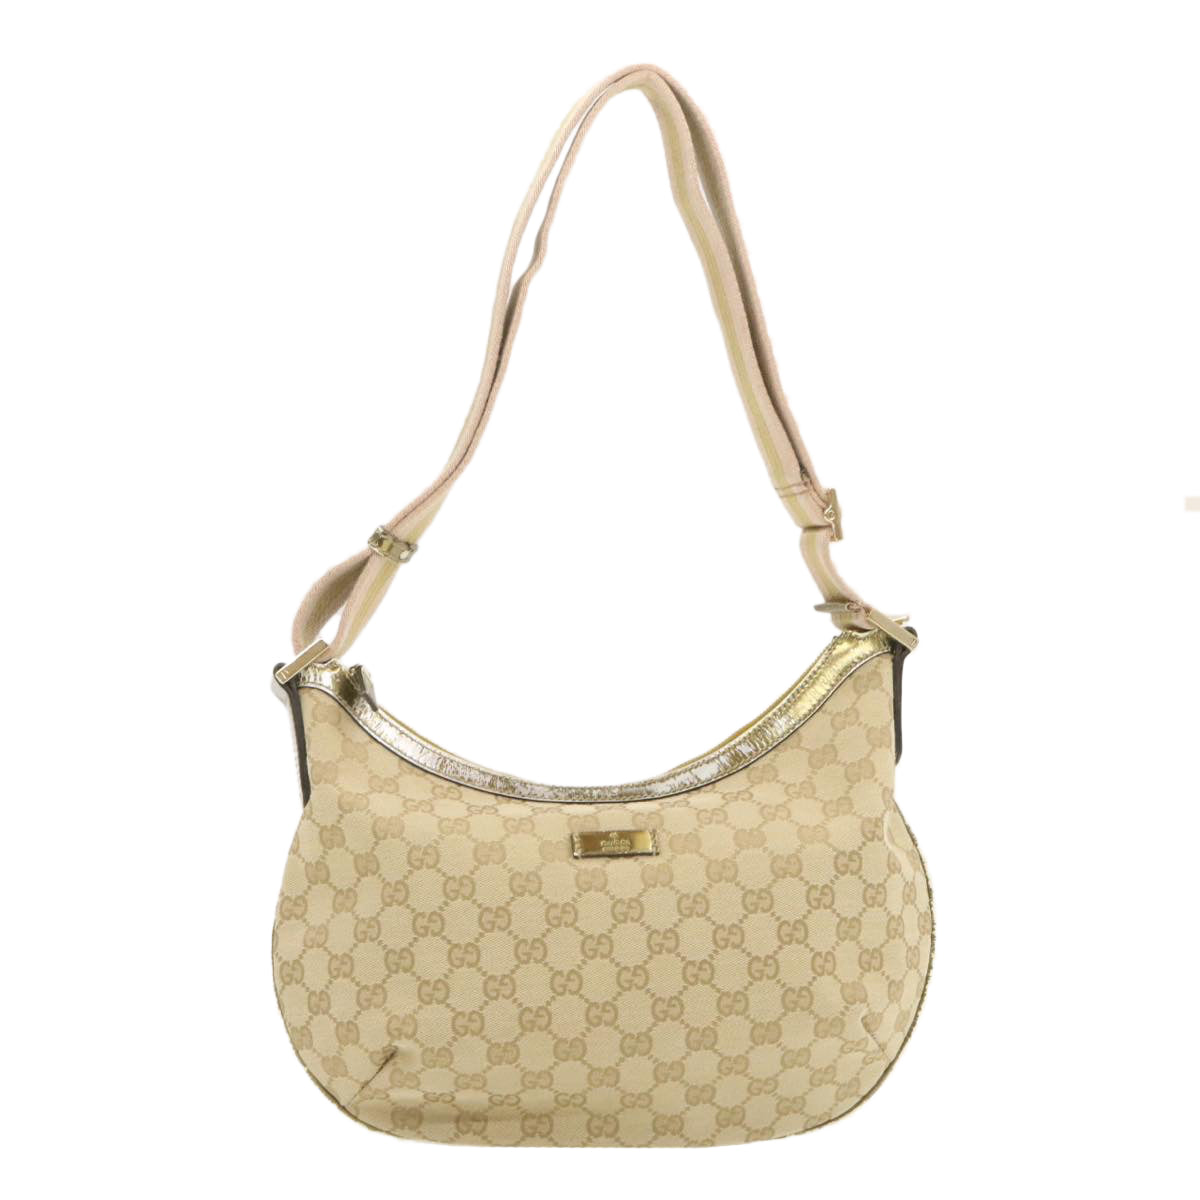 GUCCI Sherry Line GG Canvas Shoulder Bag Beige Pink Gold 181092 Auth rd1354